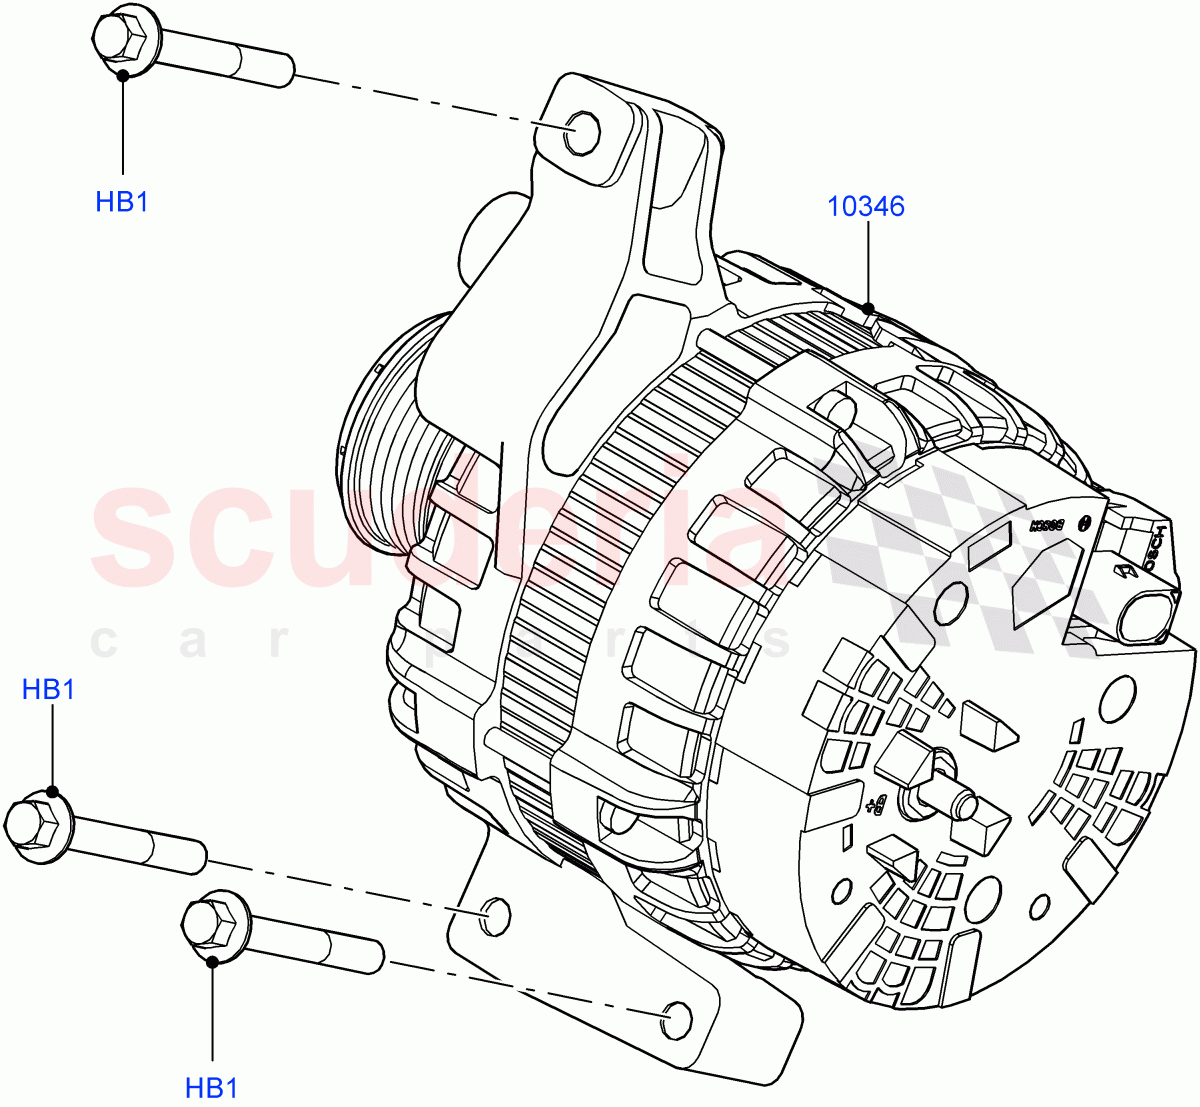 Alternator And Mountings(2.0L 16V TIVCT T/C 240PS Petrol,Changsu (China),2.0L 16V TIVCT T/C Gen2 Petrol)((V)FROMFG000001) of Land Rover Land Rover Discovery Sport (2015+) [2.0 Turbo Diesel AJ21D4]